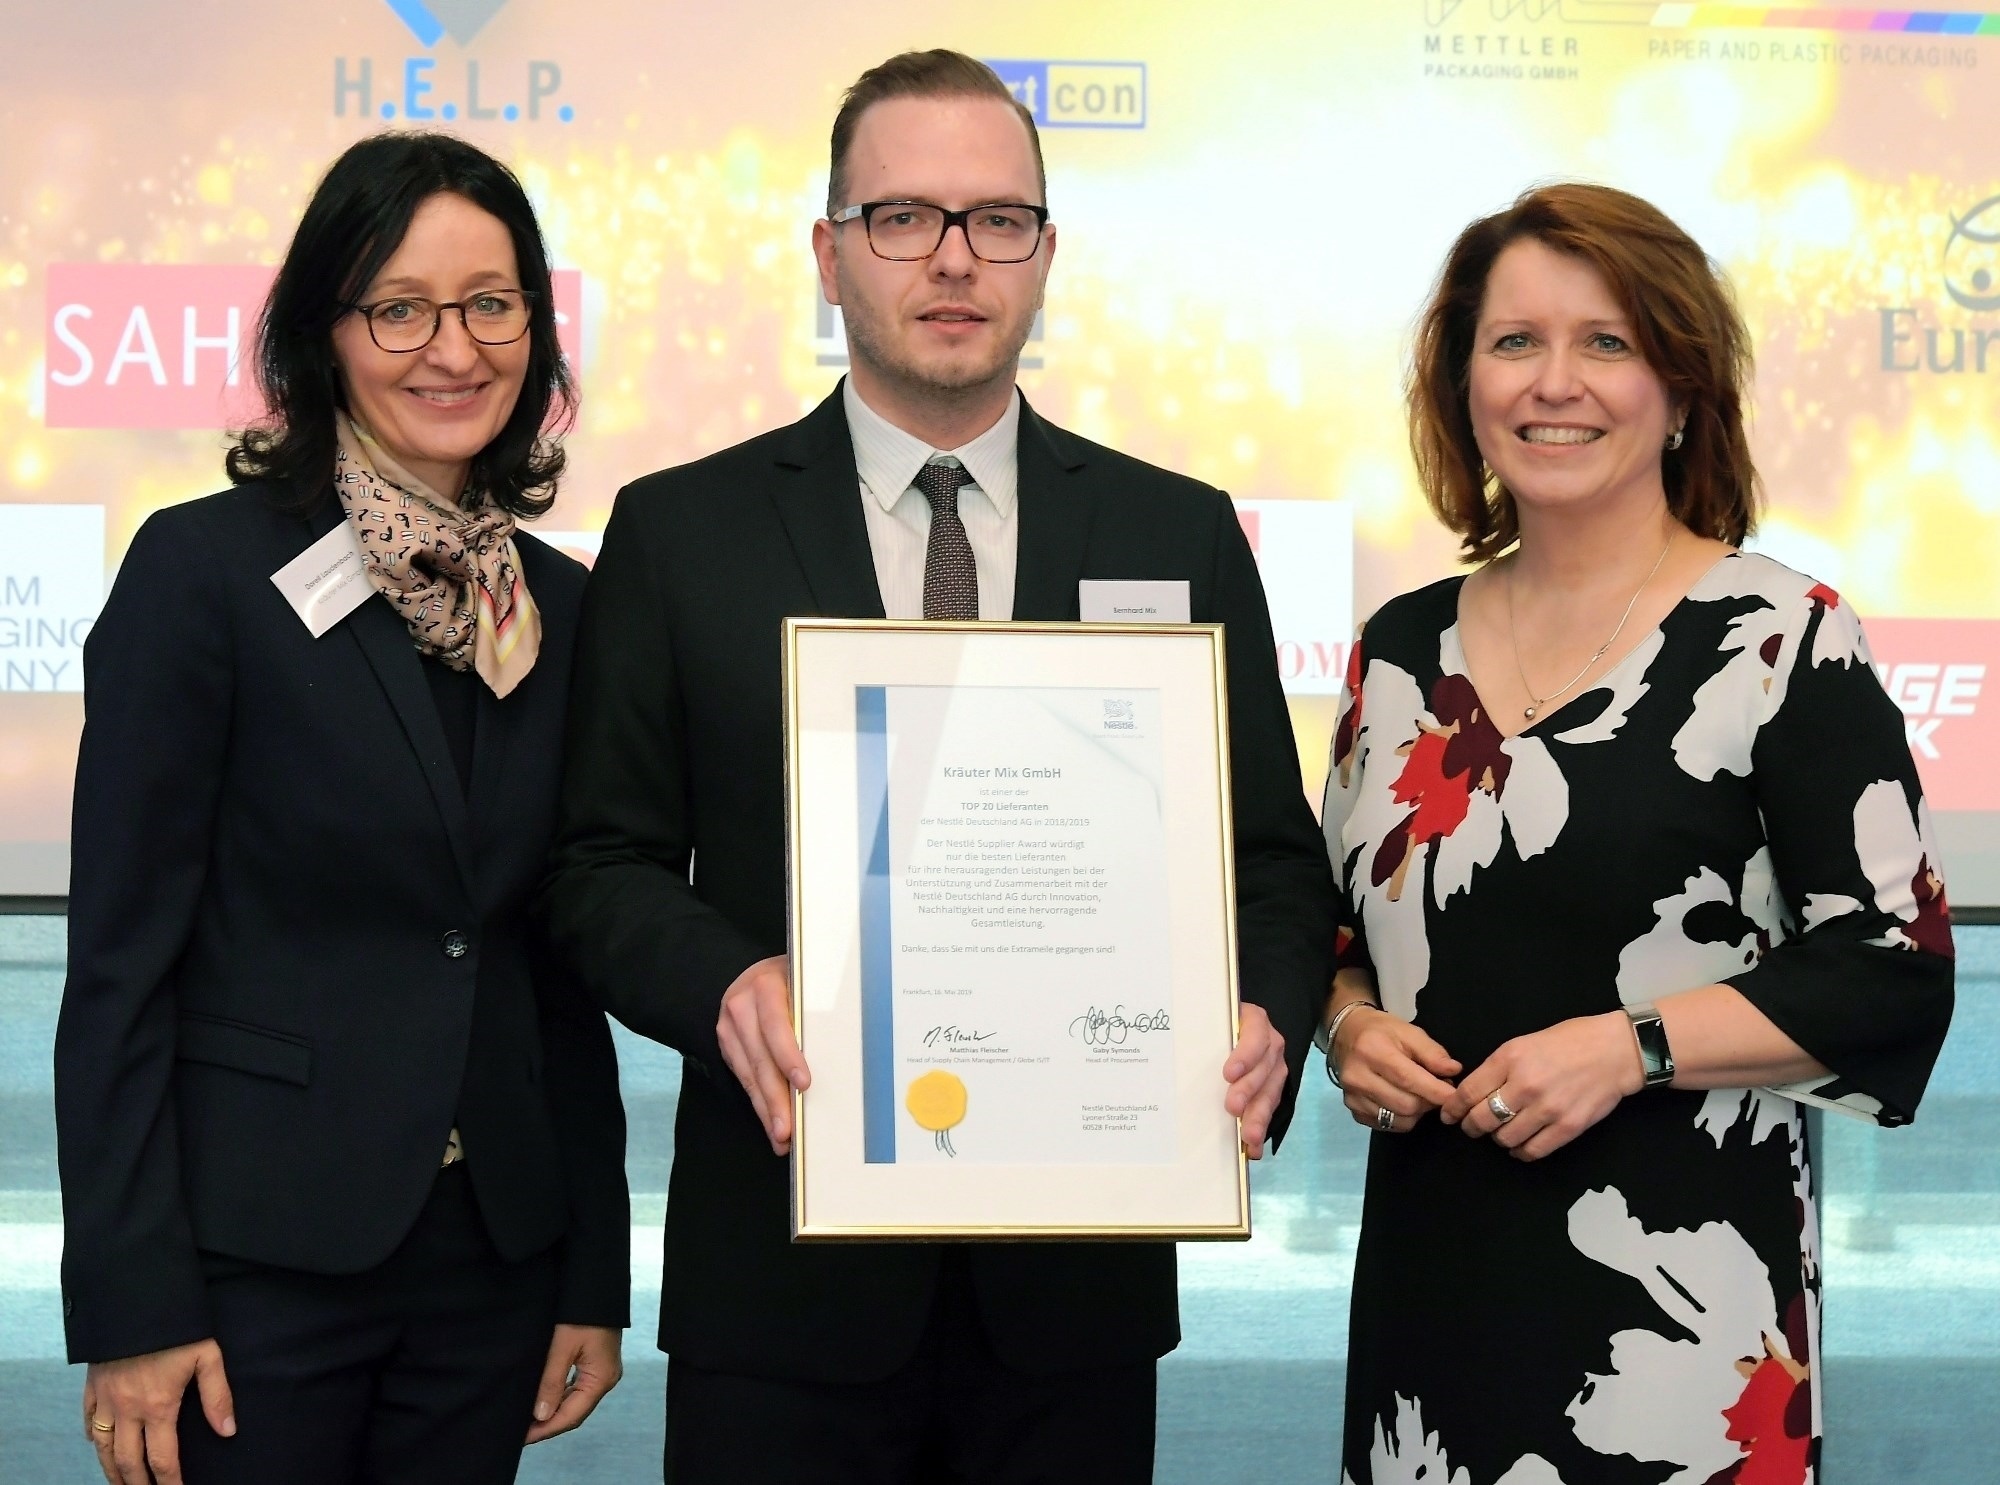 Kräuter Mix ranks among Nestlé's best suppliers: Award for outstanding achievements such as product quality and sustainability